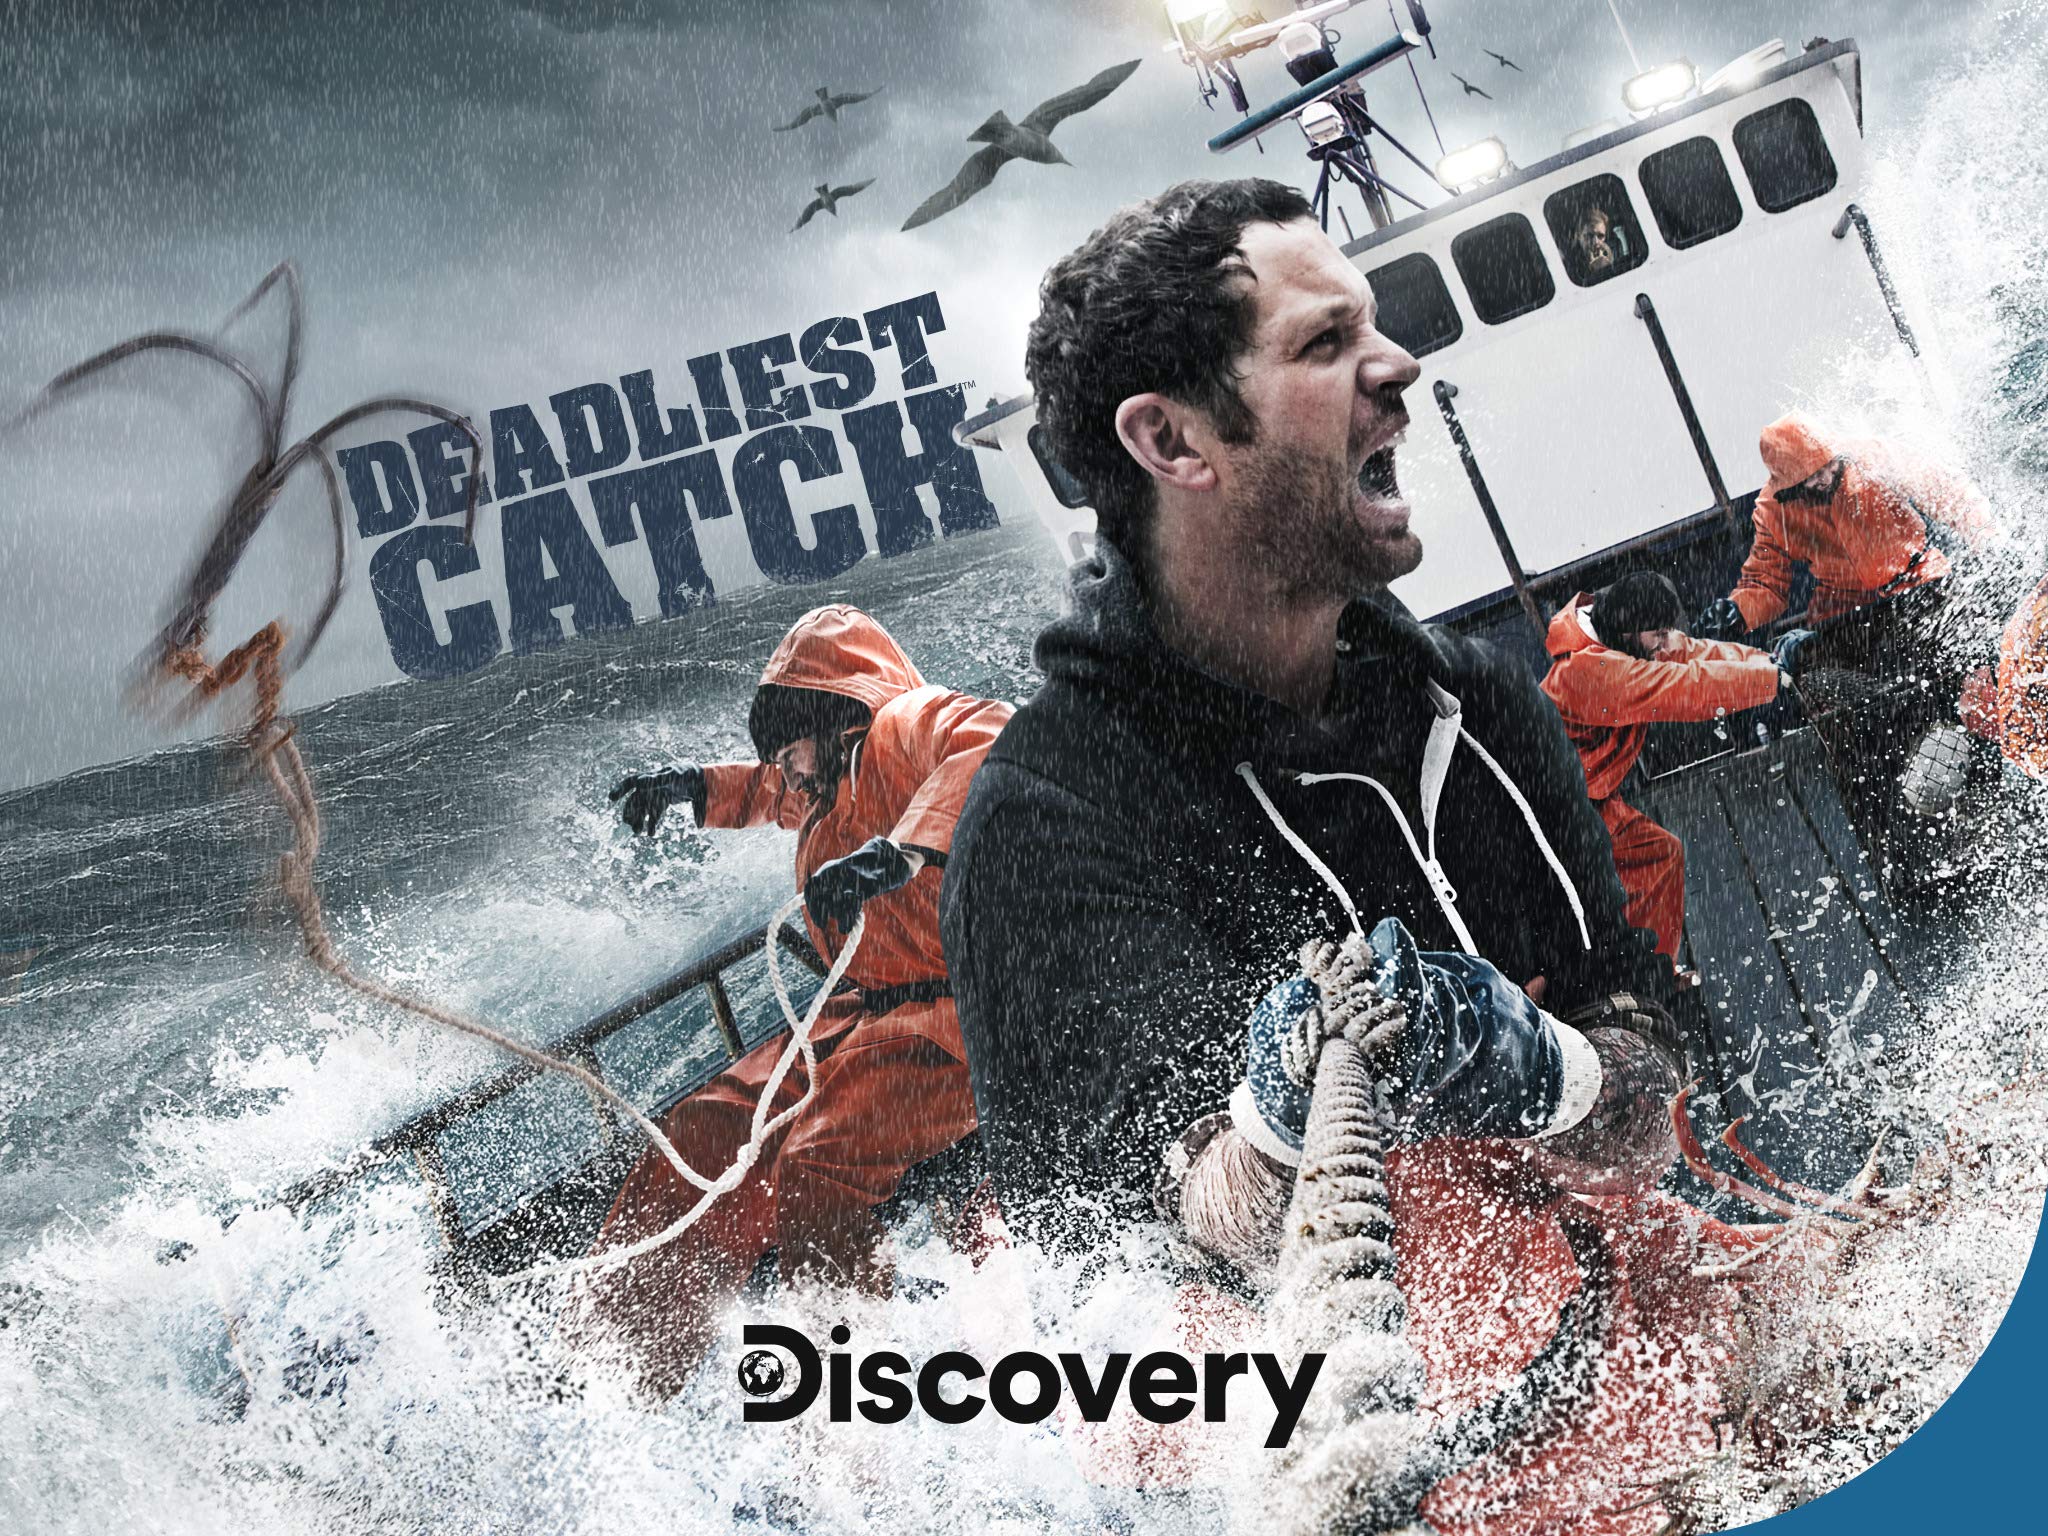 Facts You Didn’t Know About Deadliest Catch